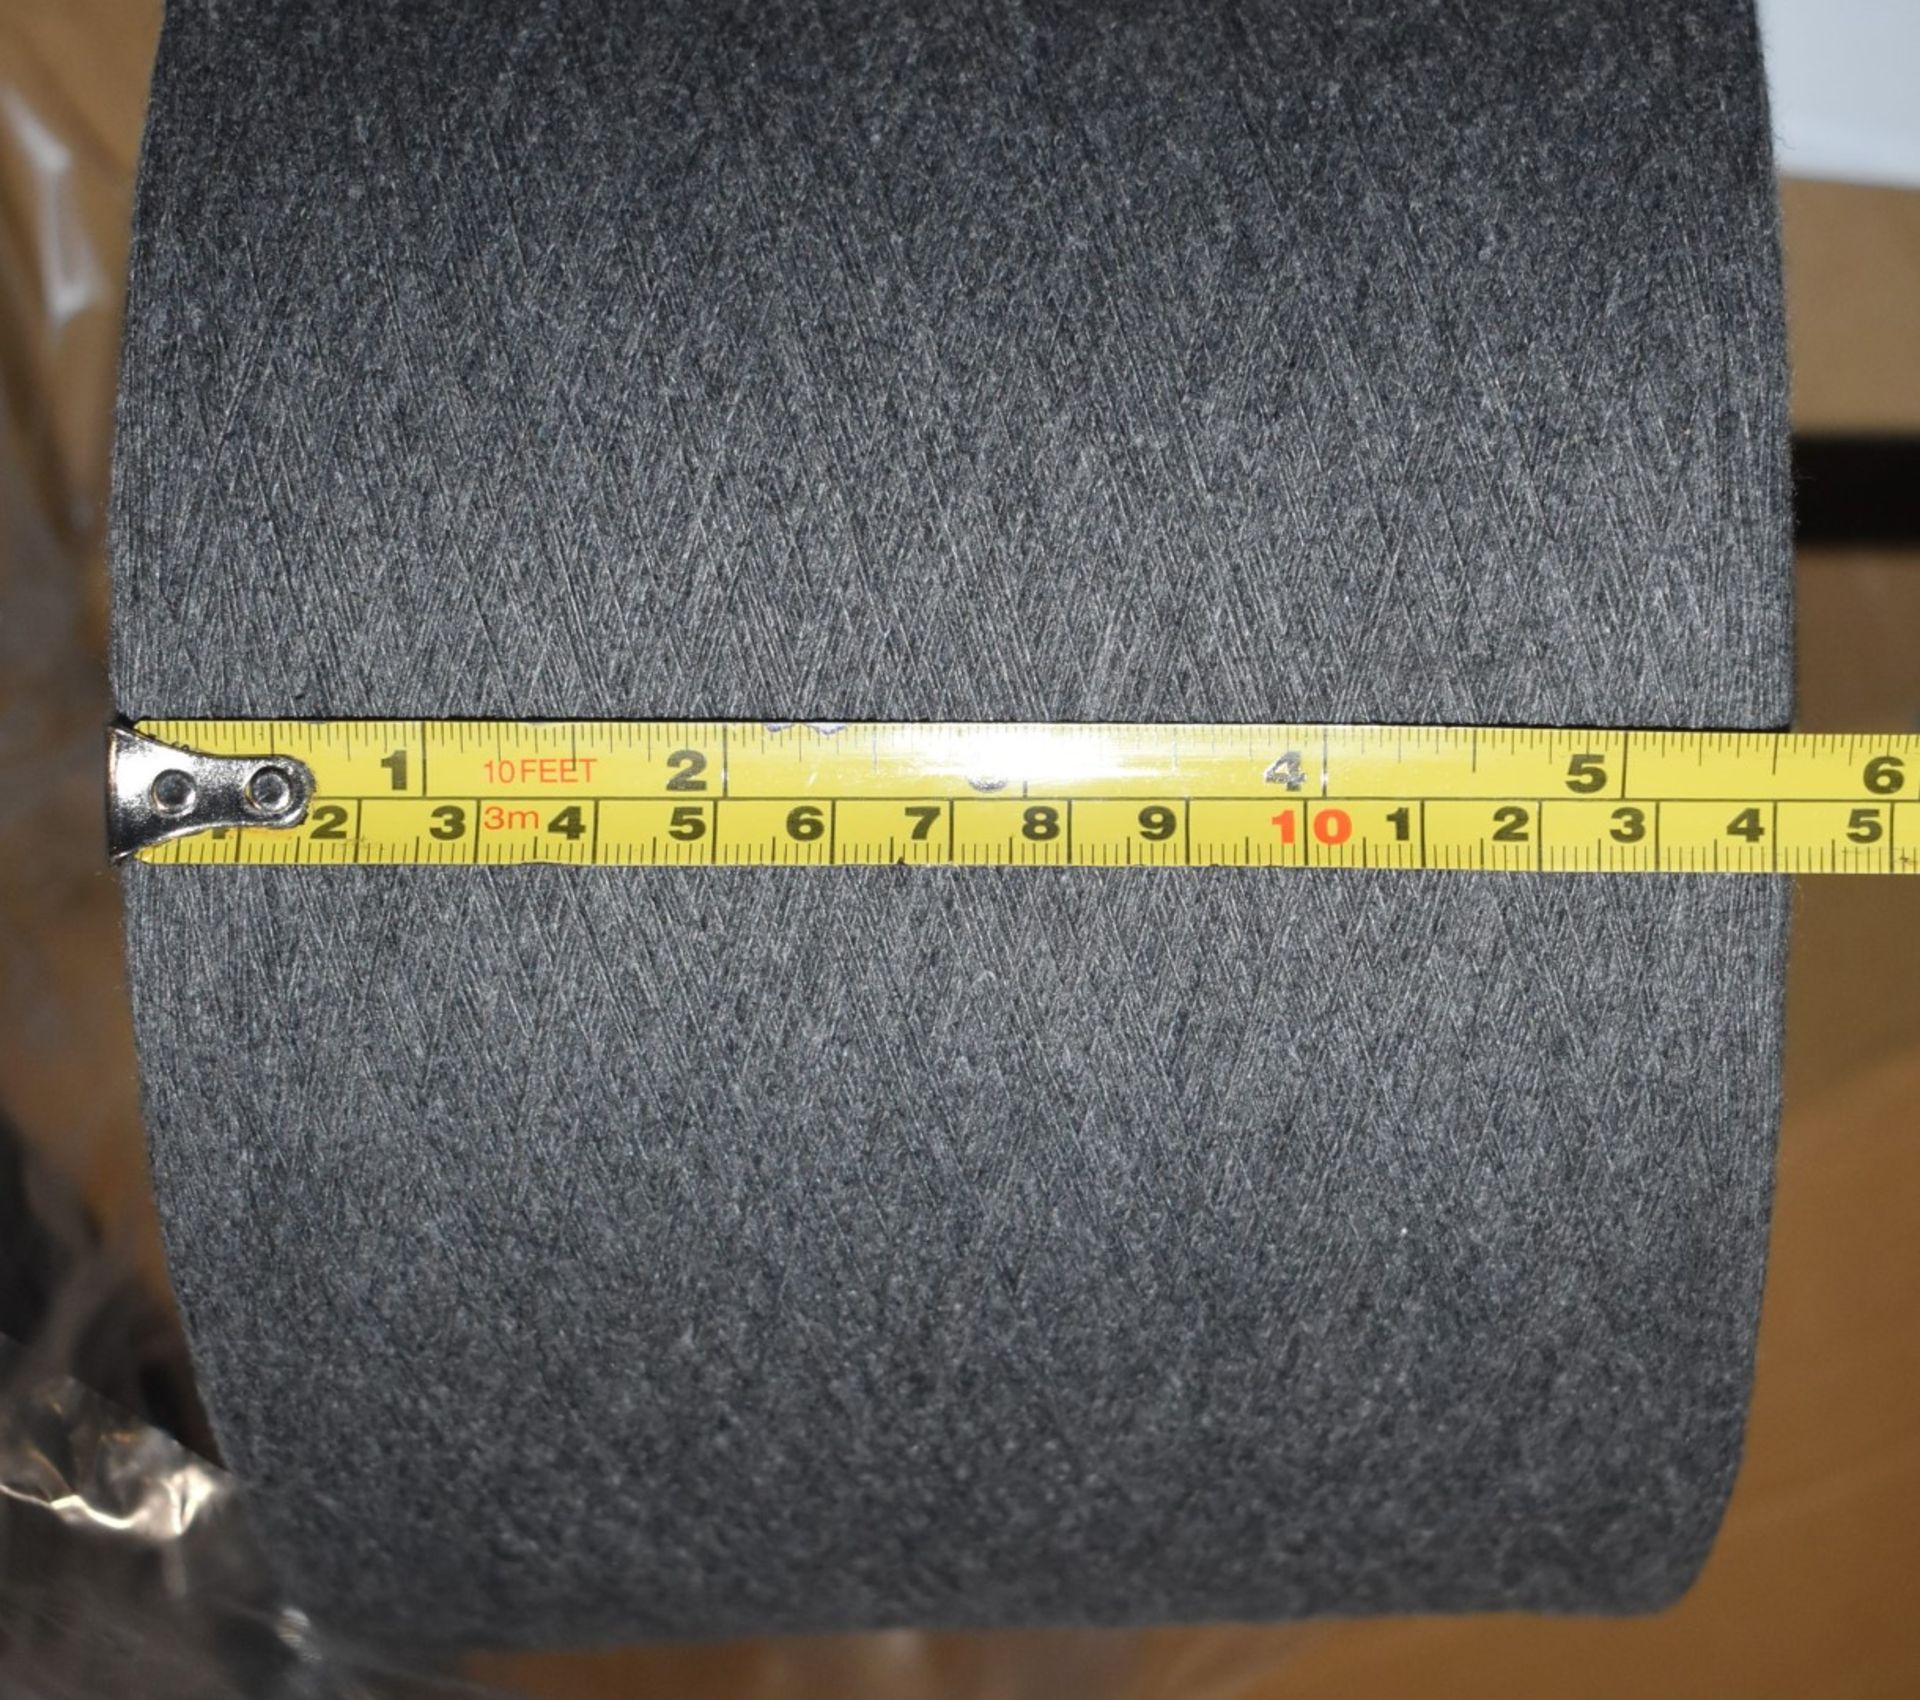 18 x Cones of 1/13 MicroCotton Knitting Yarn - Mid Grey - Approx Weight: 2,500g - New Stock ABL Yarn - Image 10 of 12